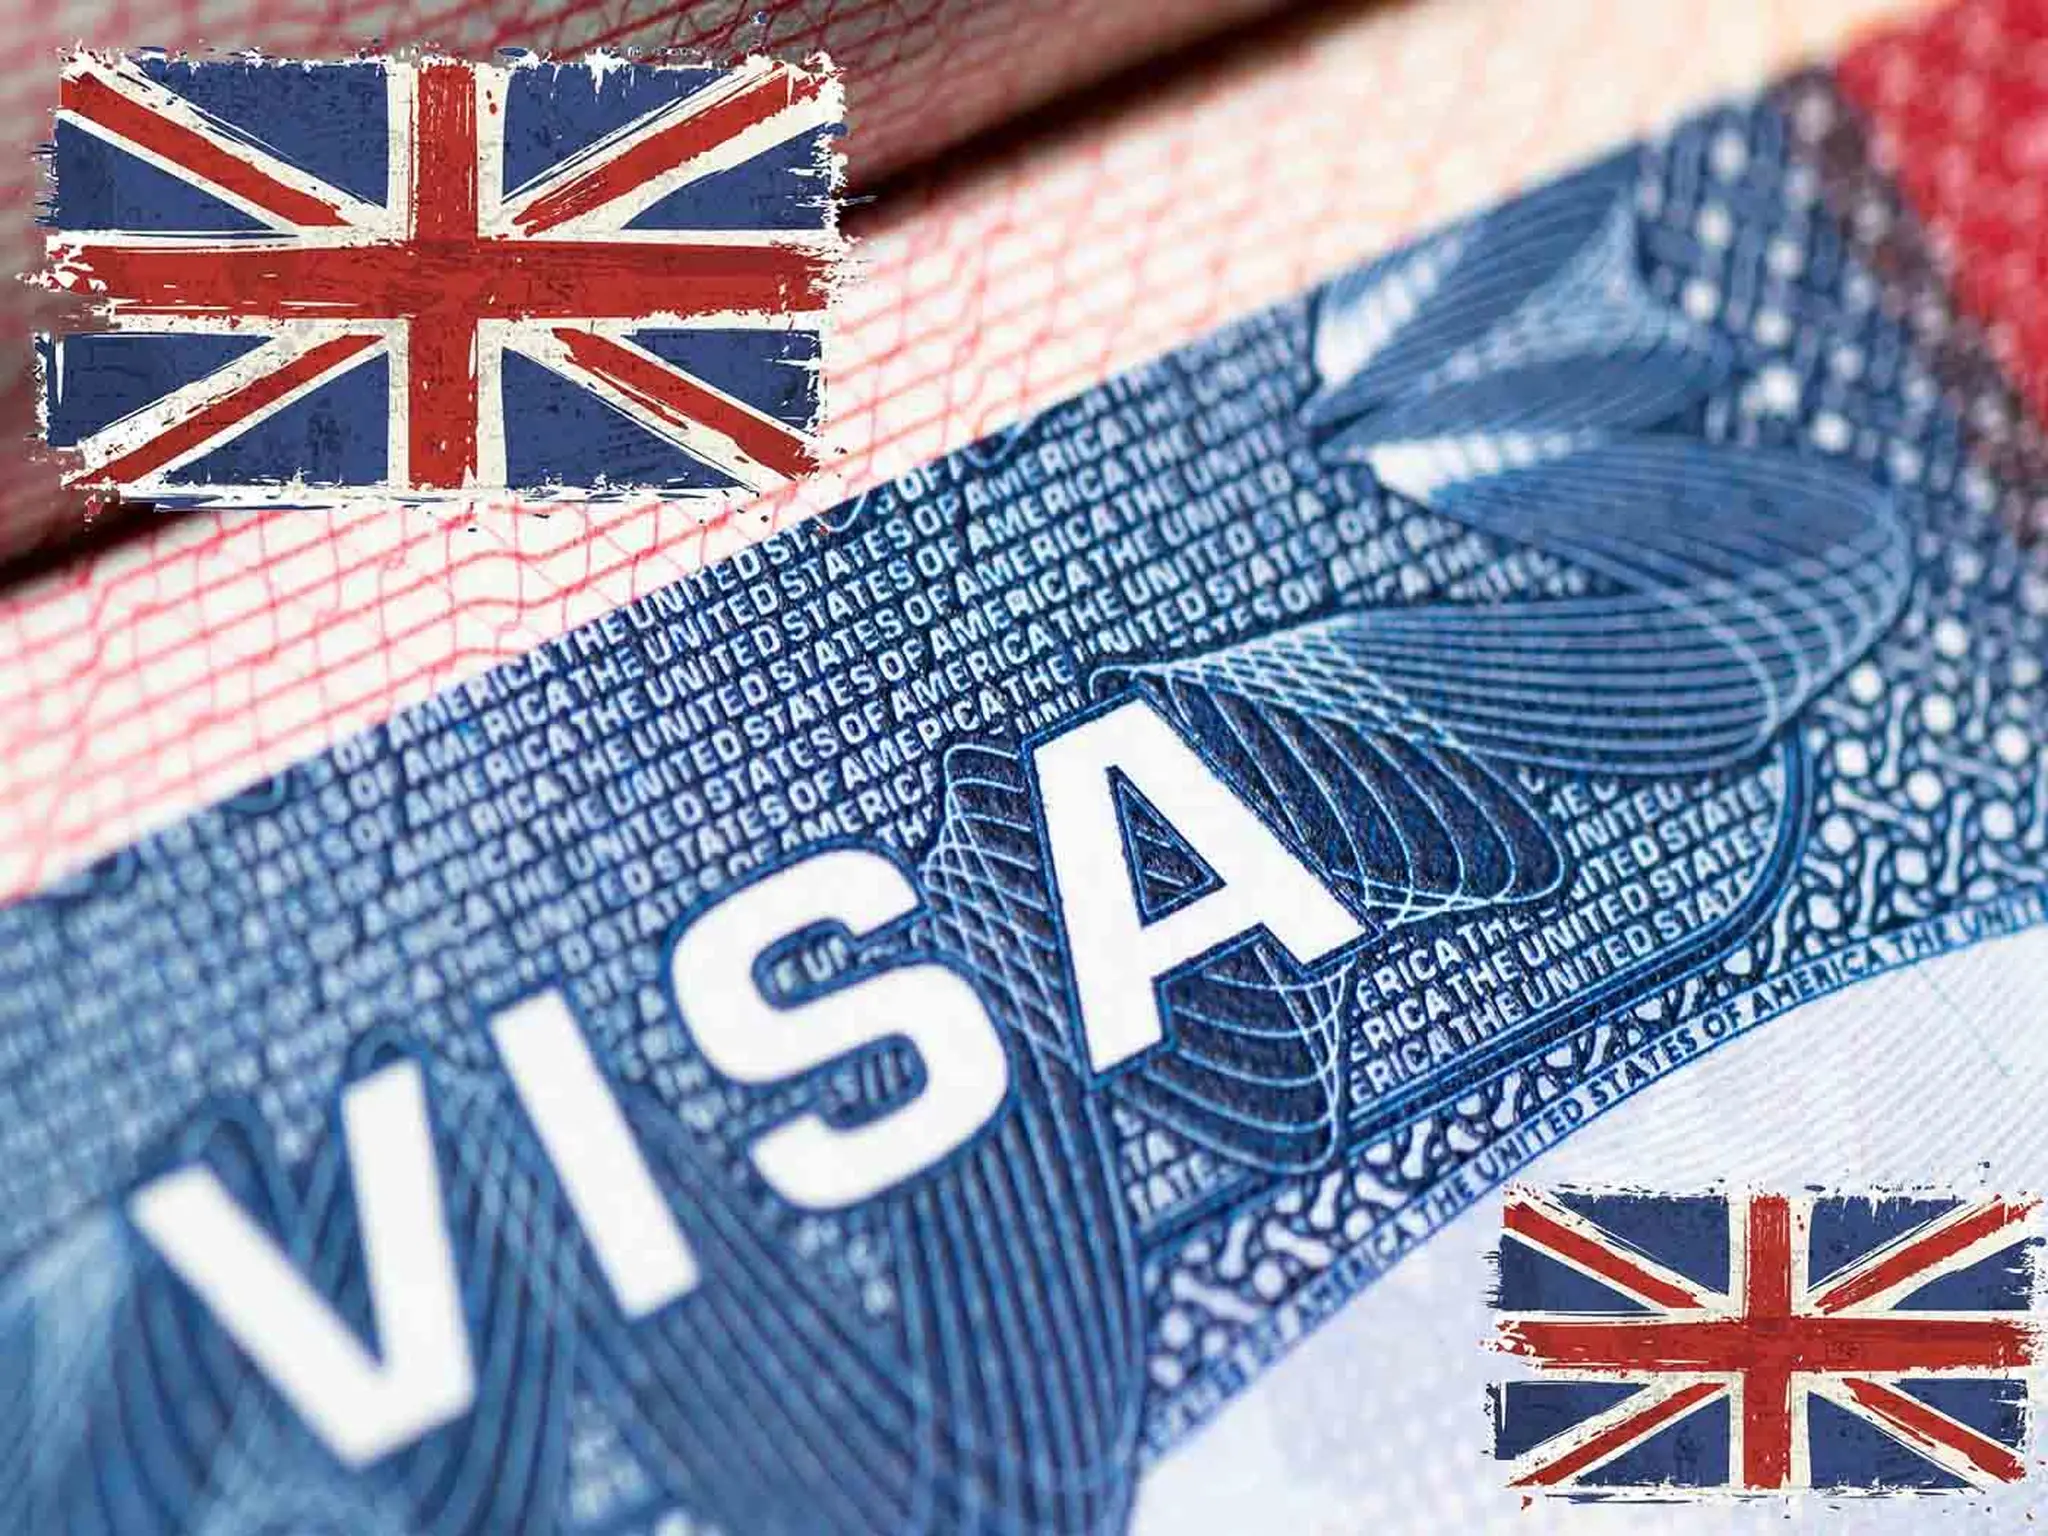 Britain announces an electronic visitor visa for these countries for only 10 British pounds